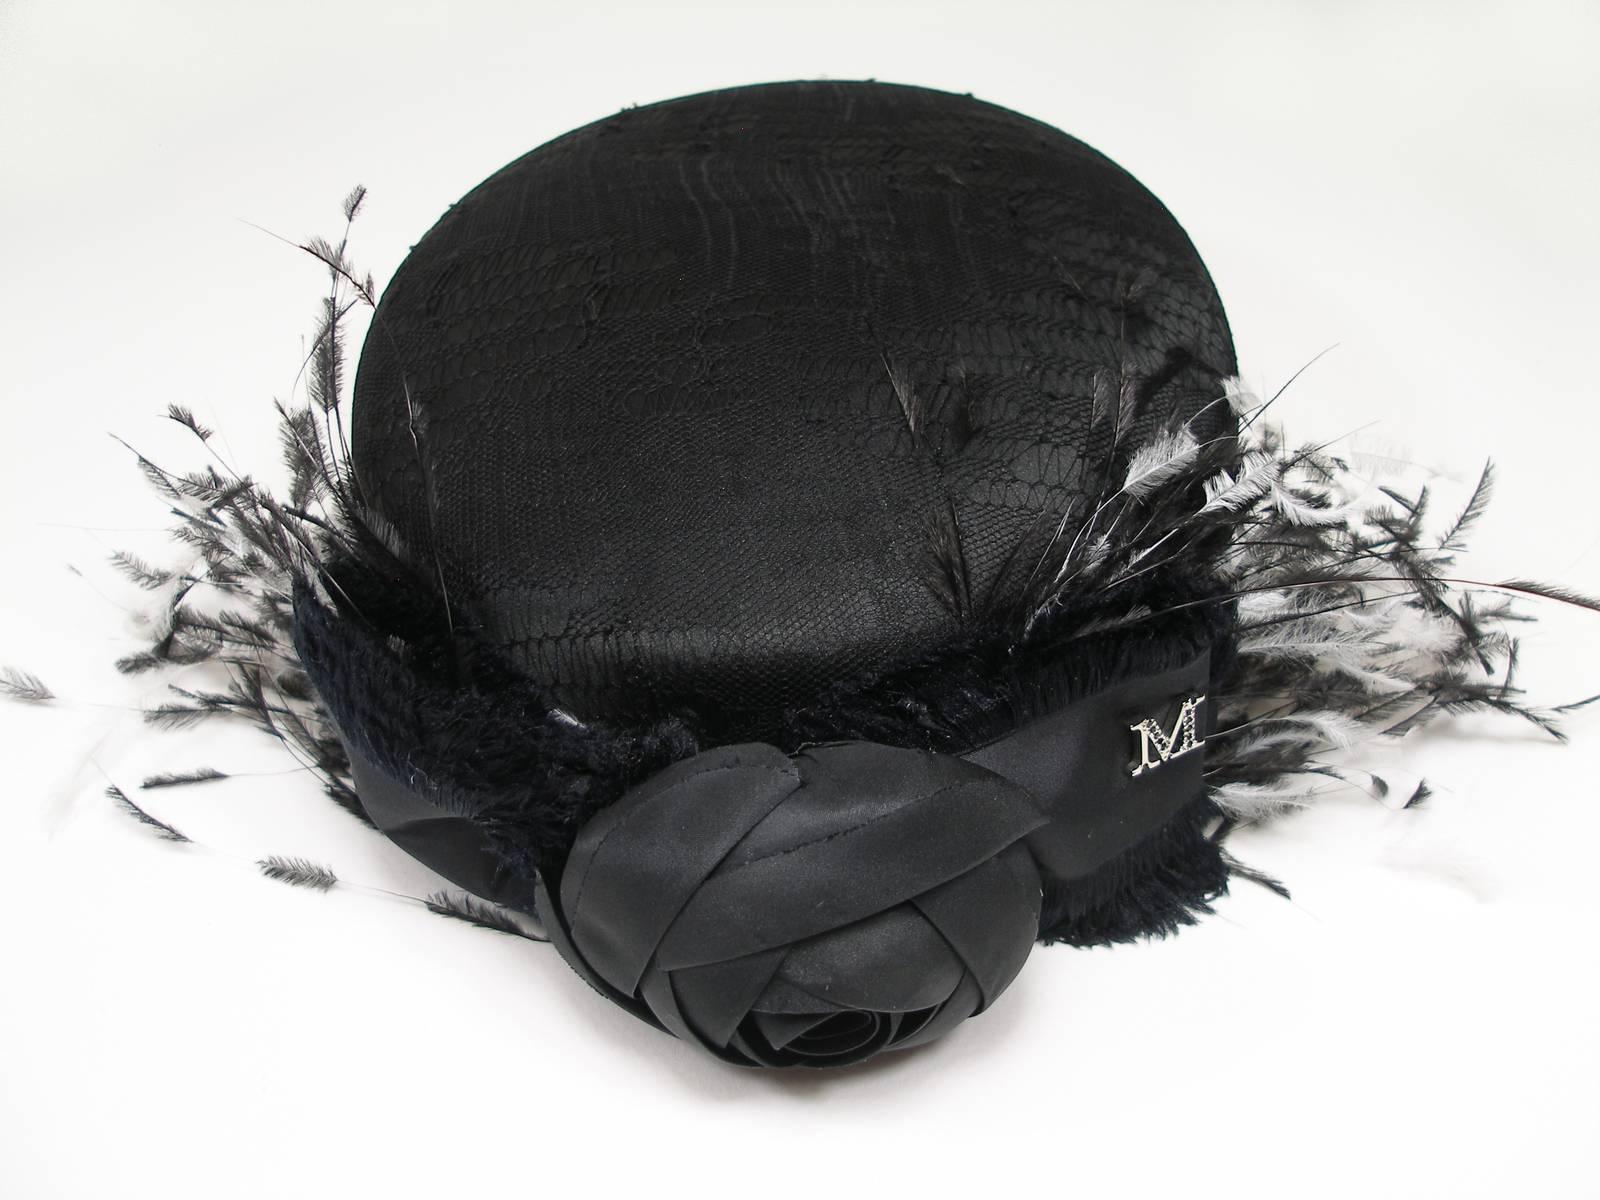 Spectacular Hat Maison Michel Paris Made In France 
Feathers and Silk 
S size or diameter intérieur 48 cm or 18.89
Hat Dimensions  : 18 x 16 cm or 7.08 x 6.29 